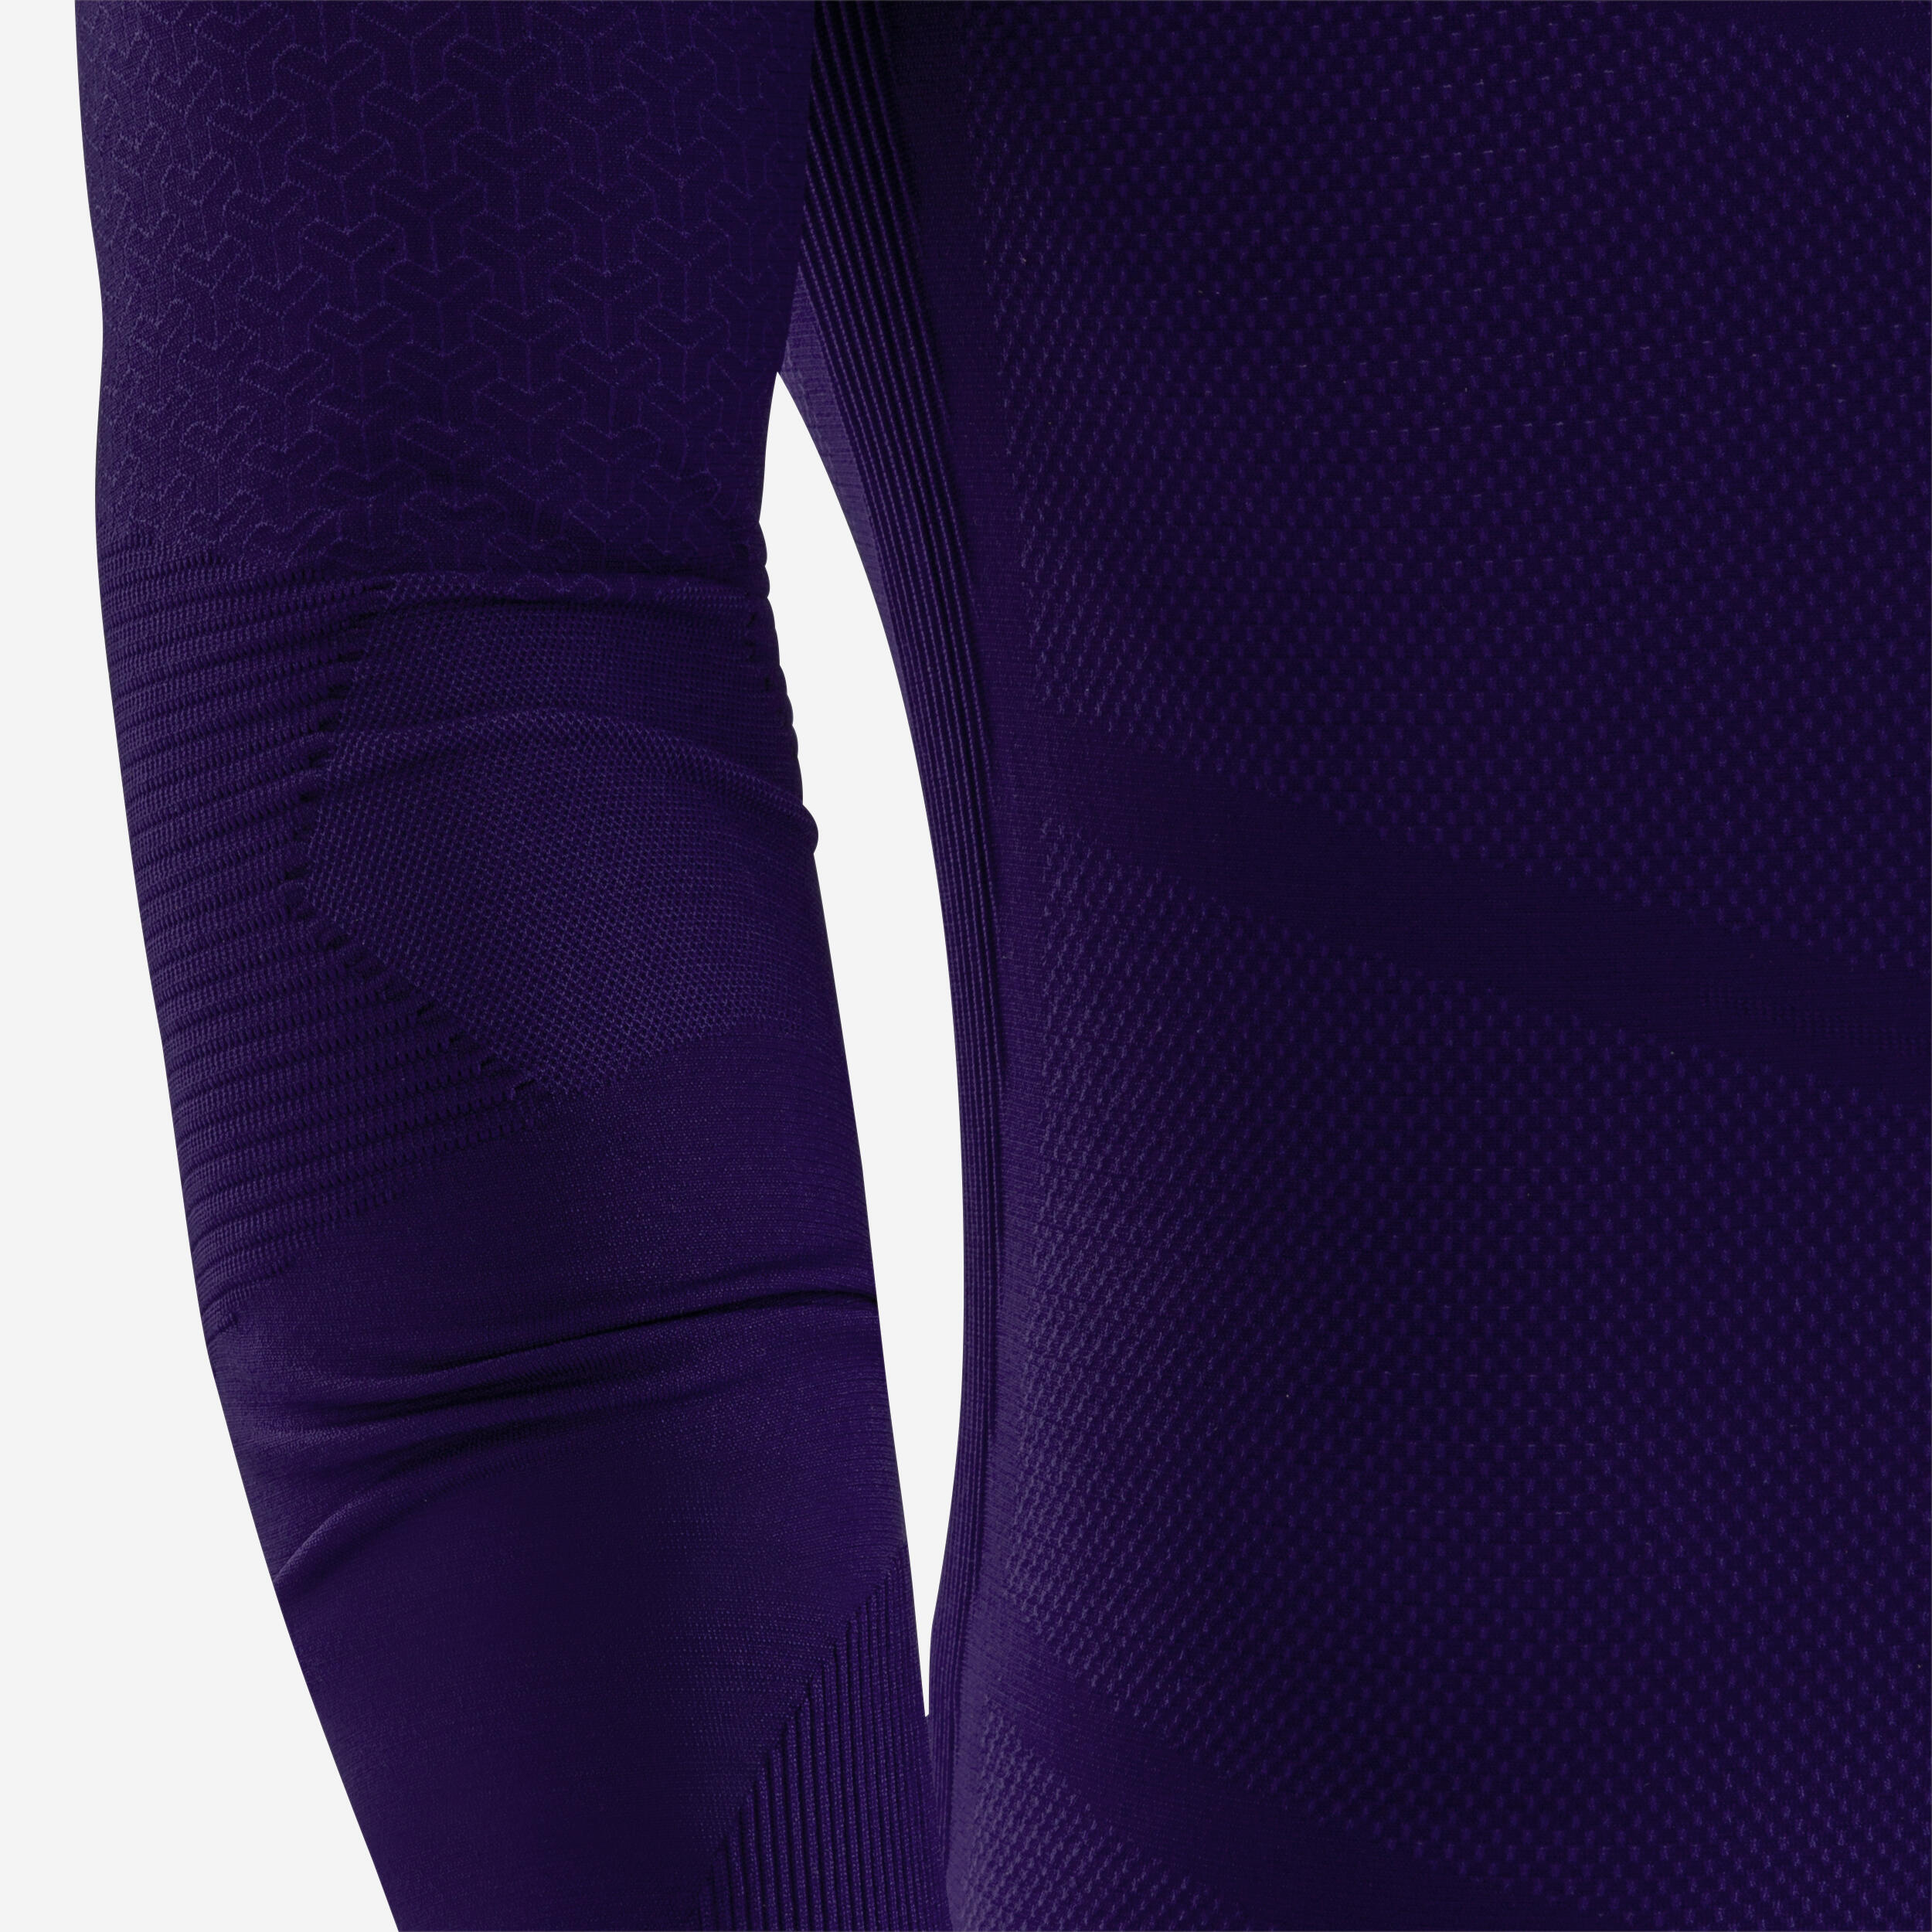 Adult Long-Sleeved Thermal Base Layer Top Keepdry 500 - Purple 13/15